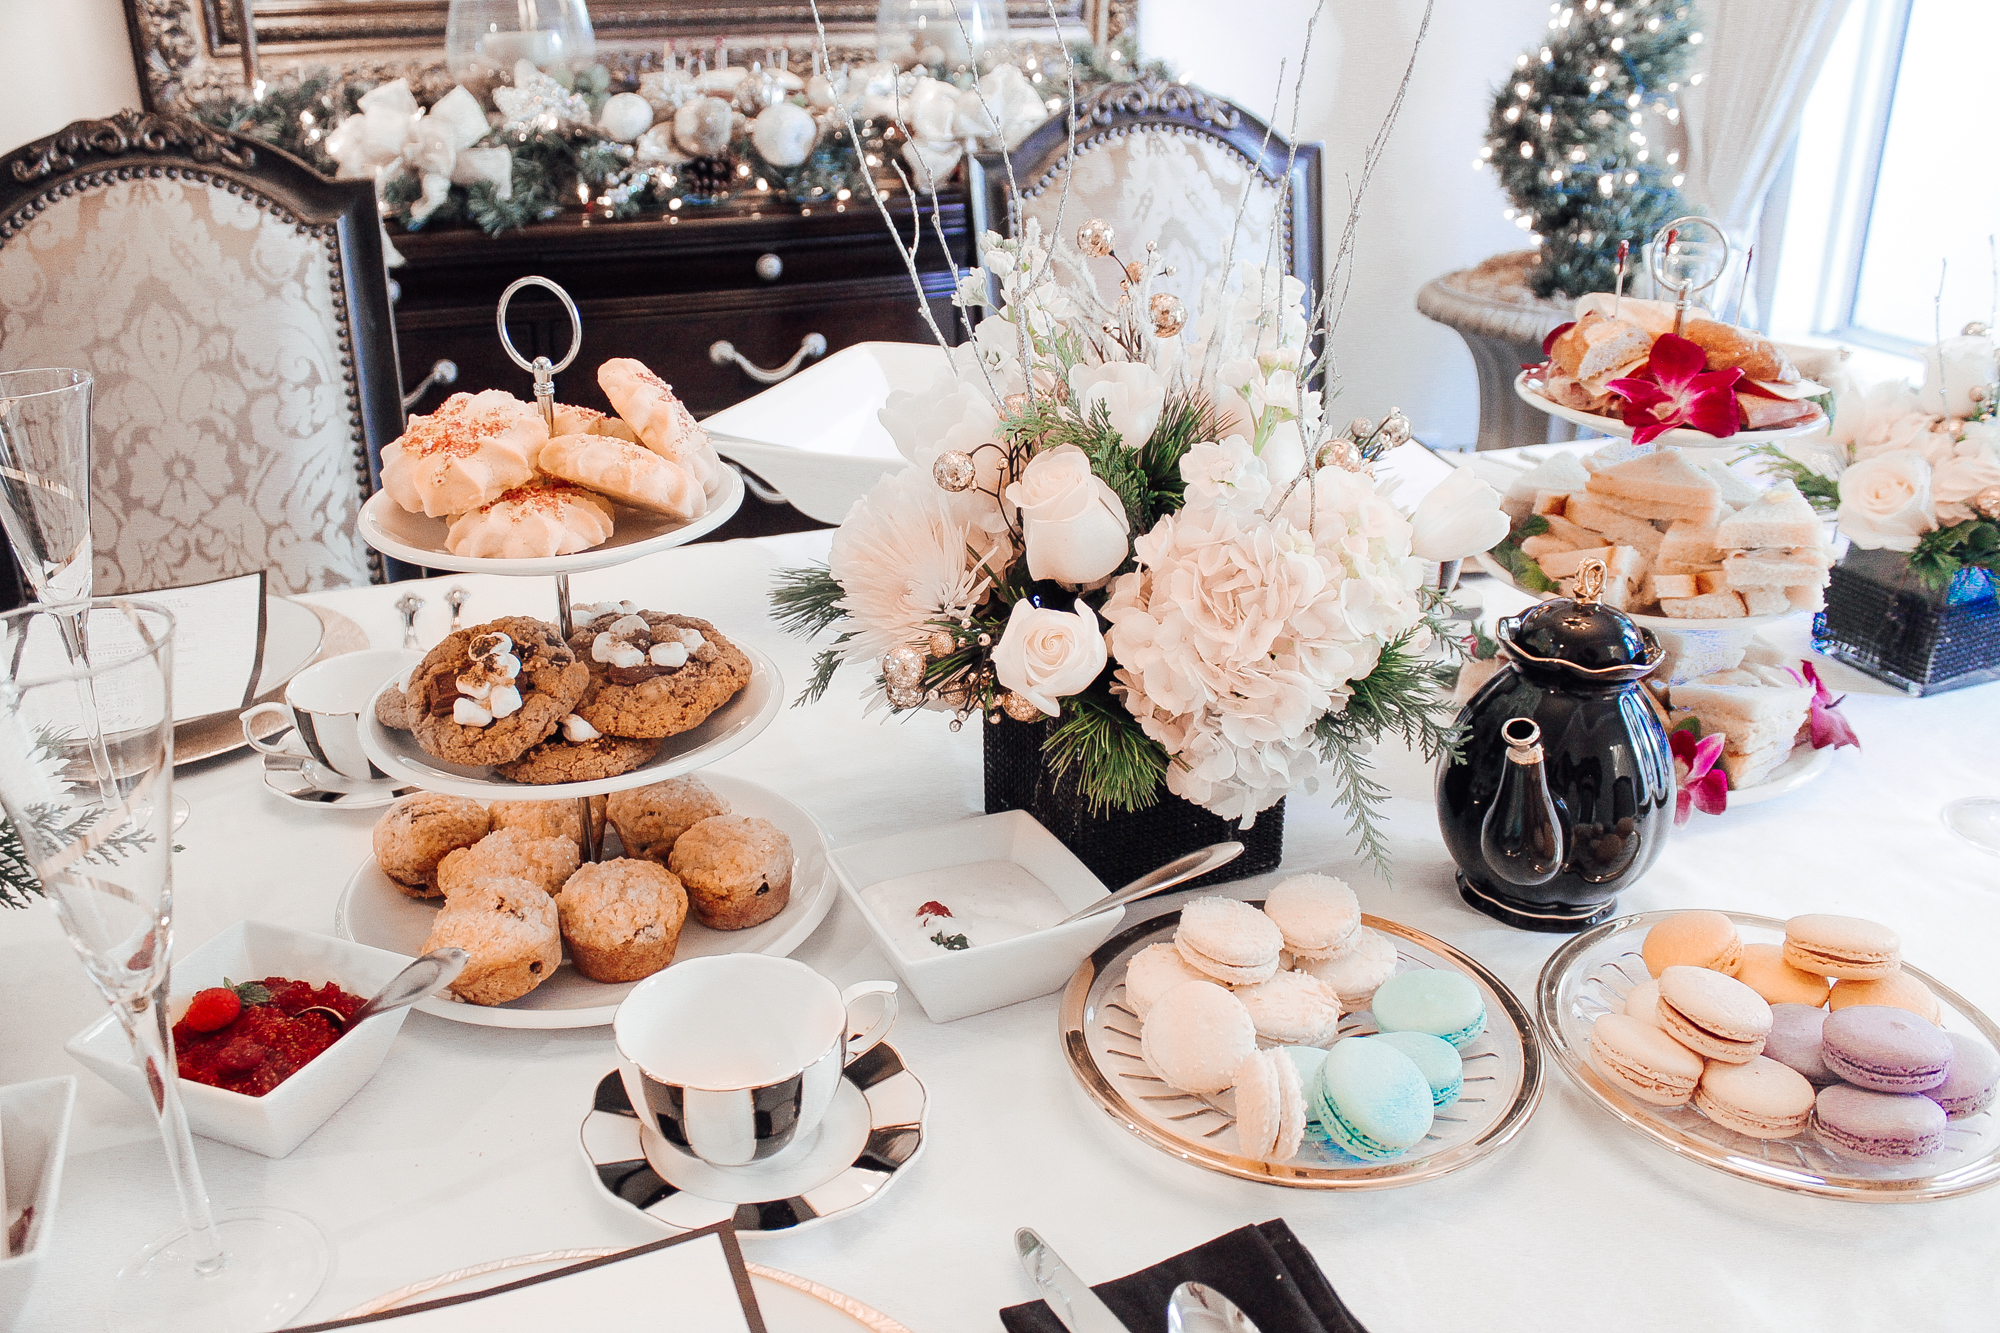 Blondie in the City | Let's Have Tea With The Bride To Be | How To Ask Your Bridesmaids